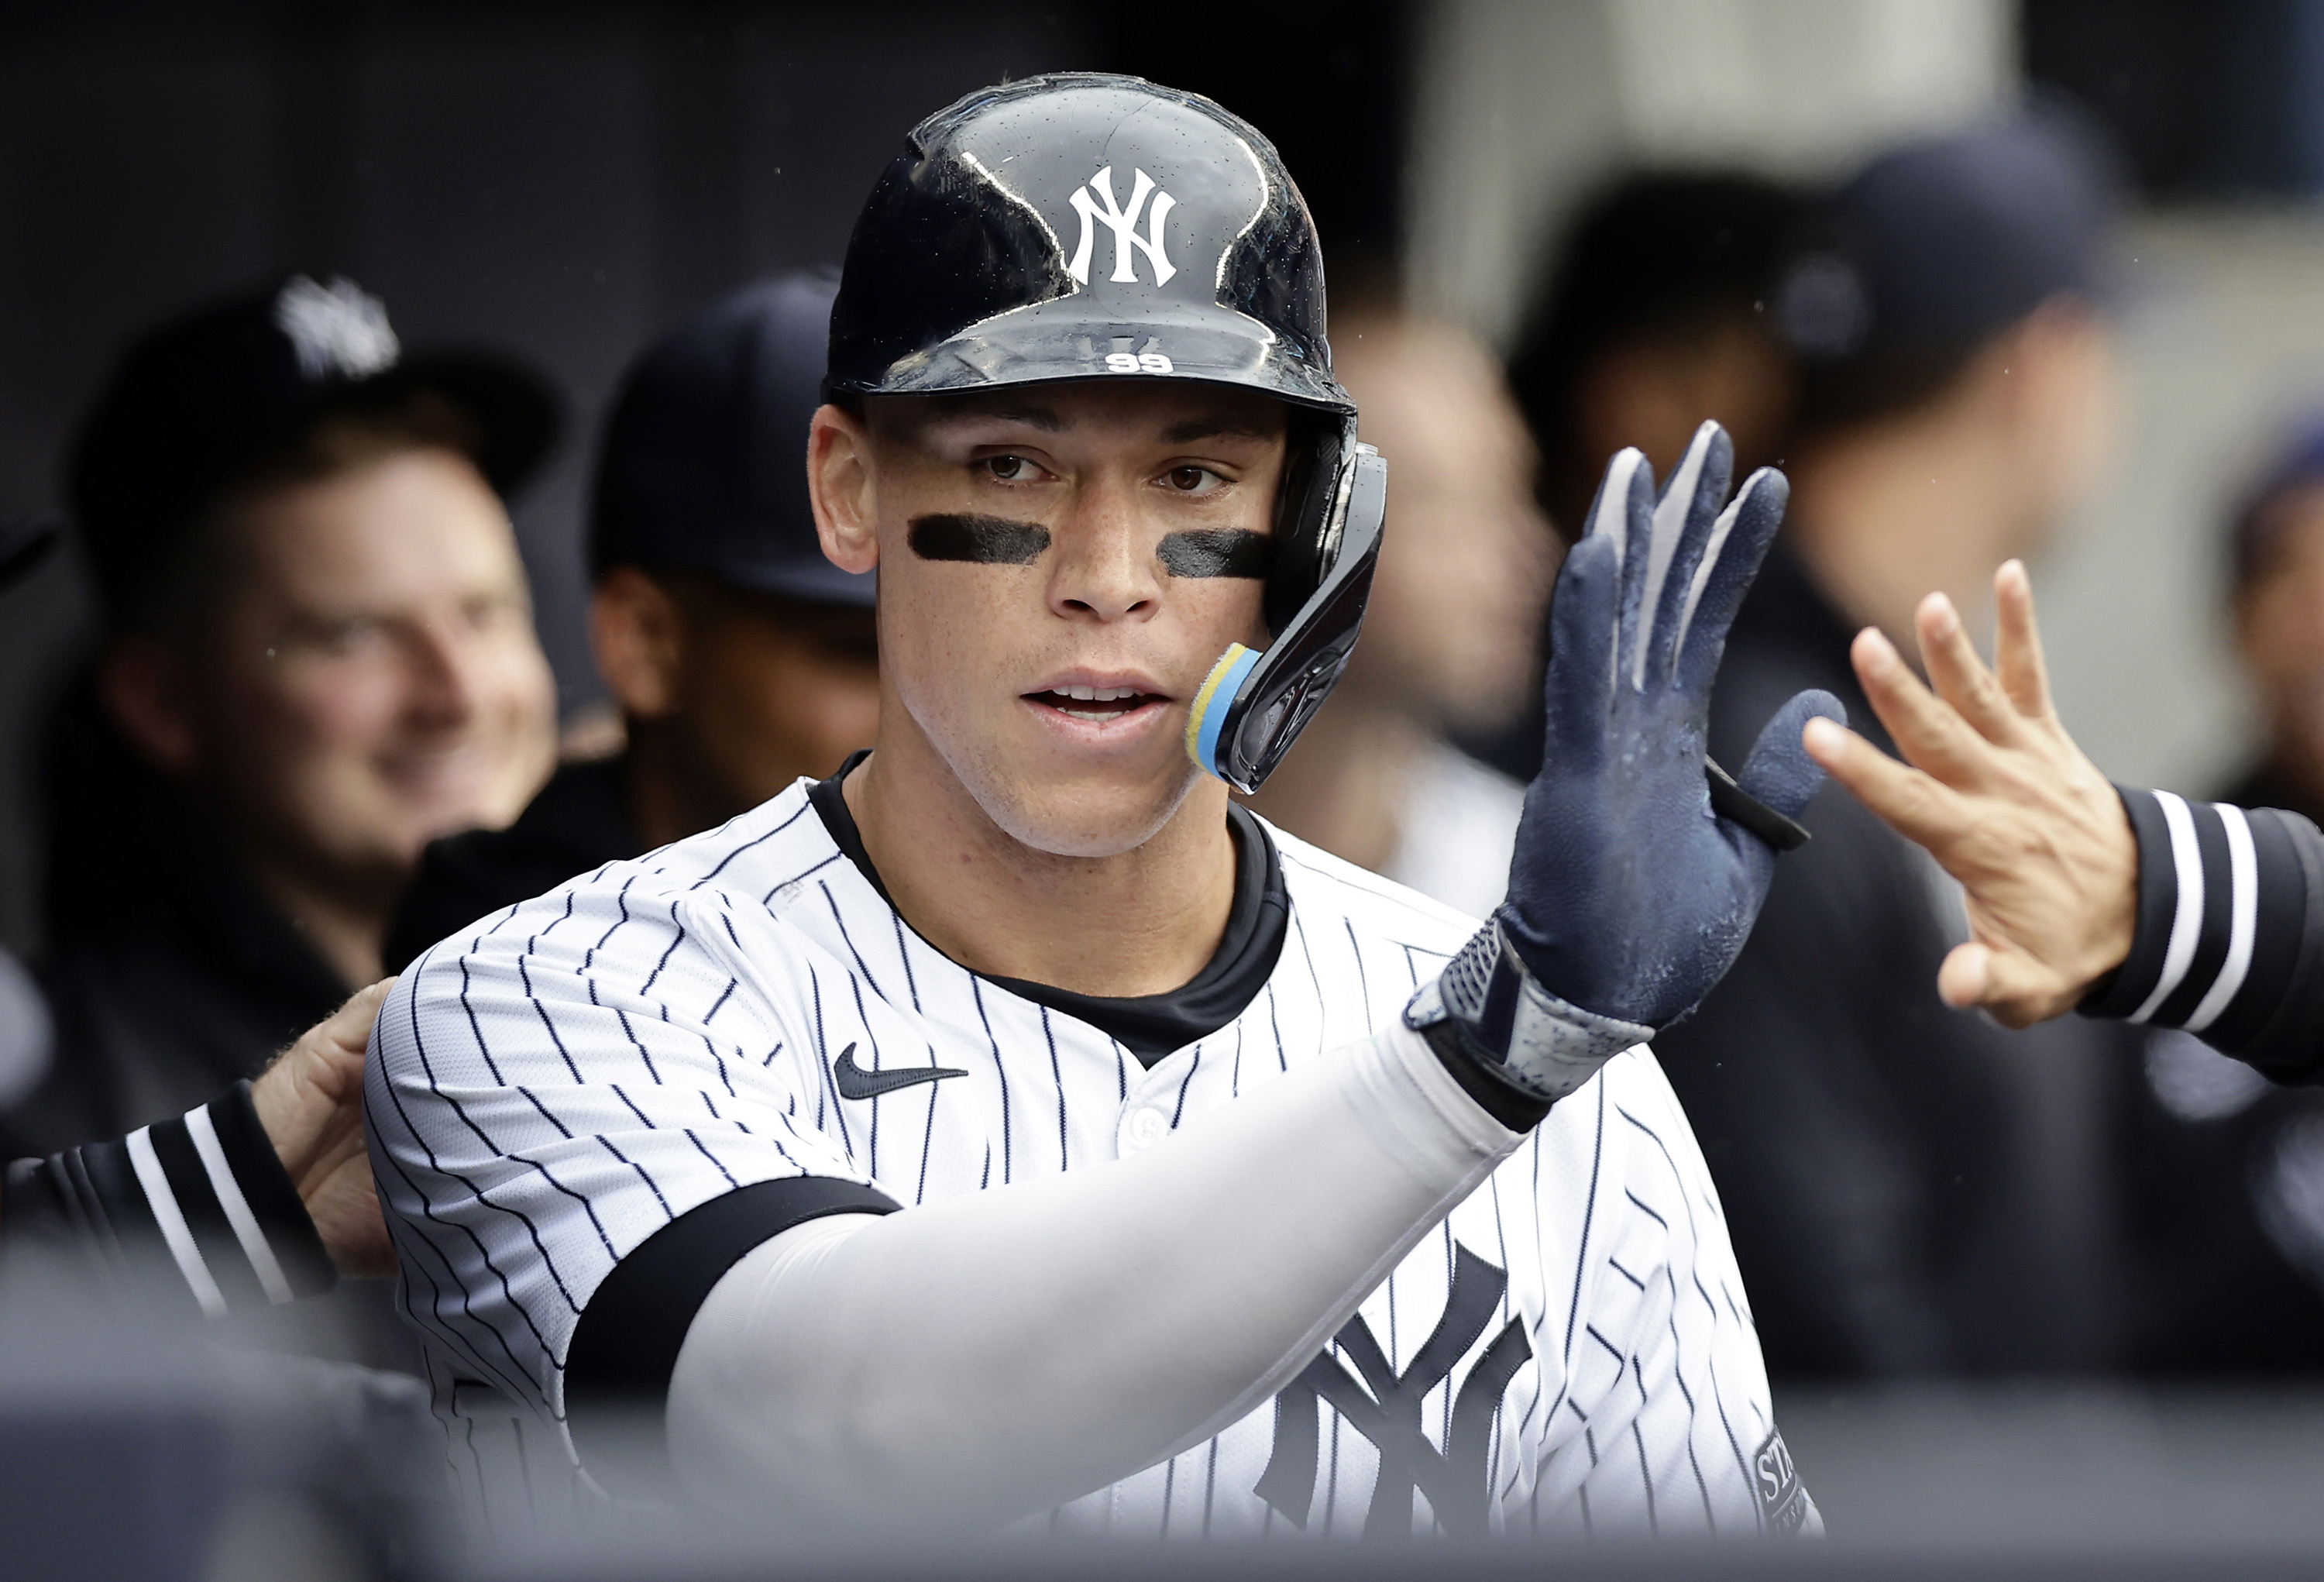 aaron judge homers in first at-bat since ejection, juan soto hits game-winning double as yankees sweep tigers